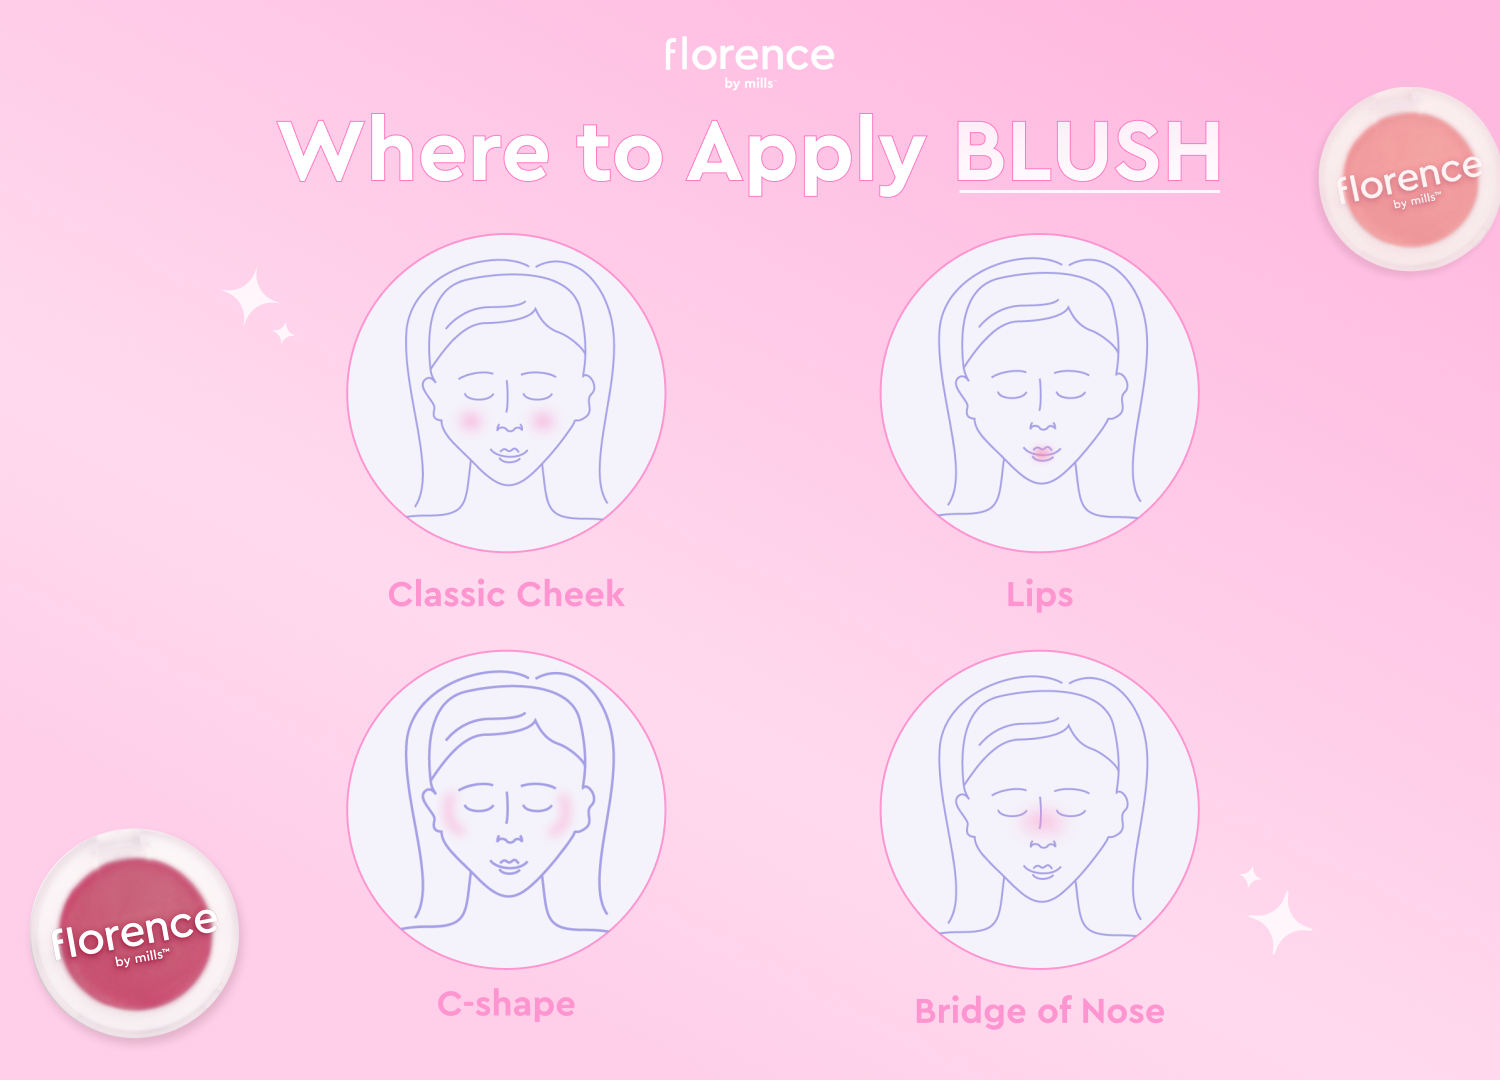 Where to Apply Blush infographic by Florence by Mills